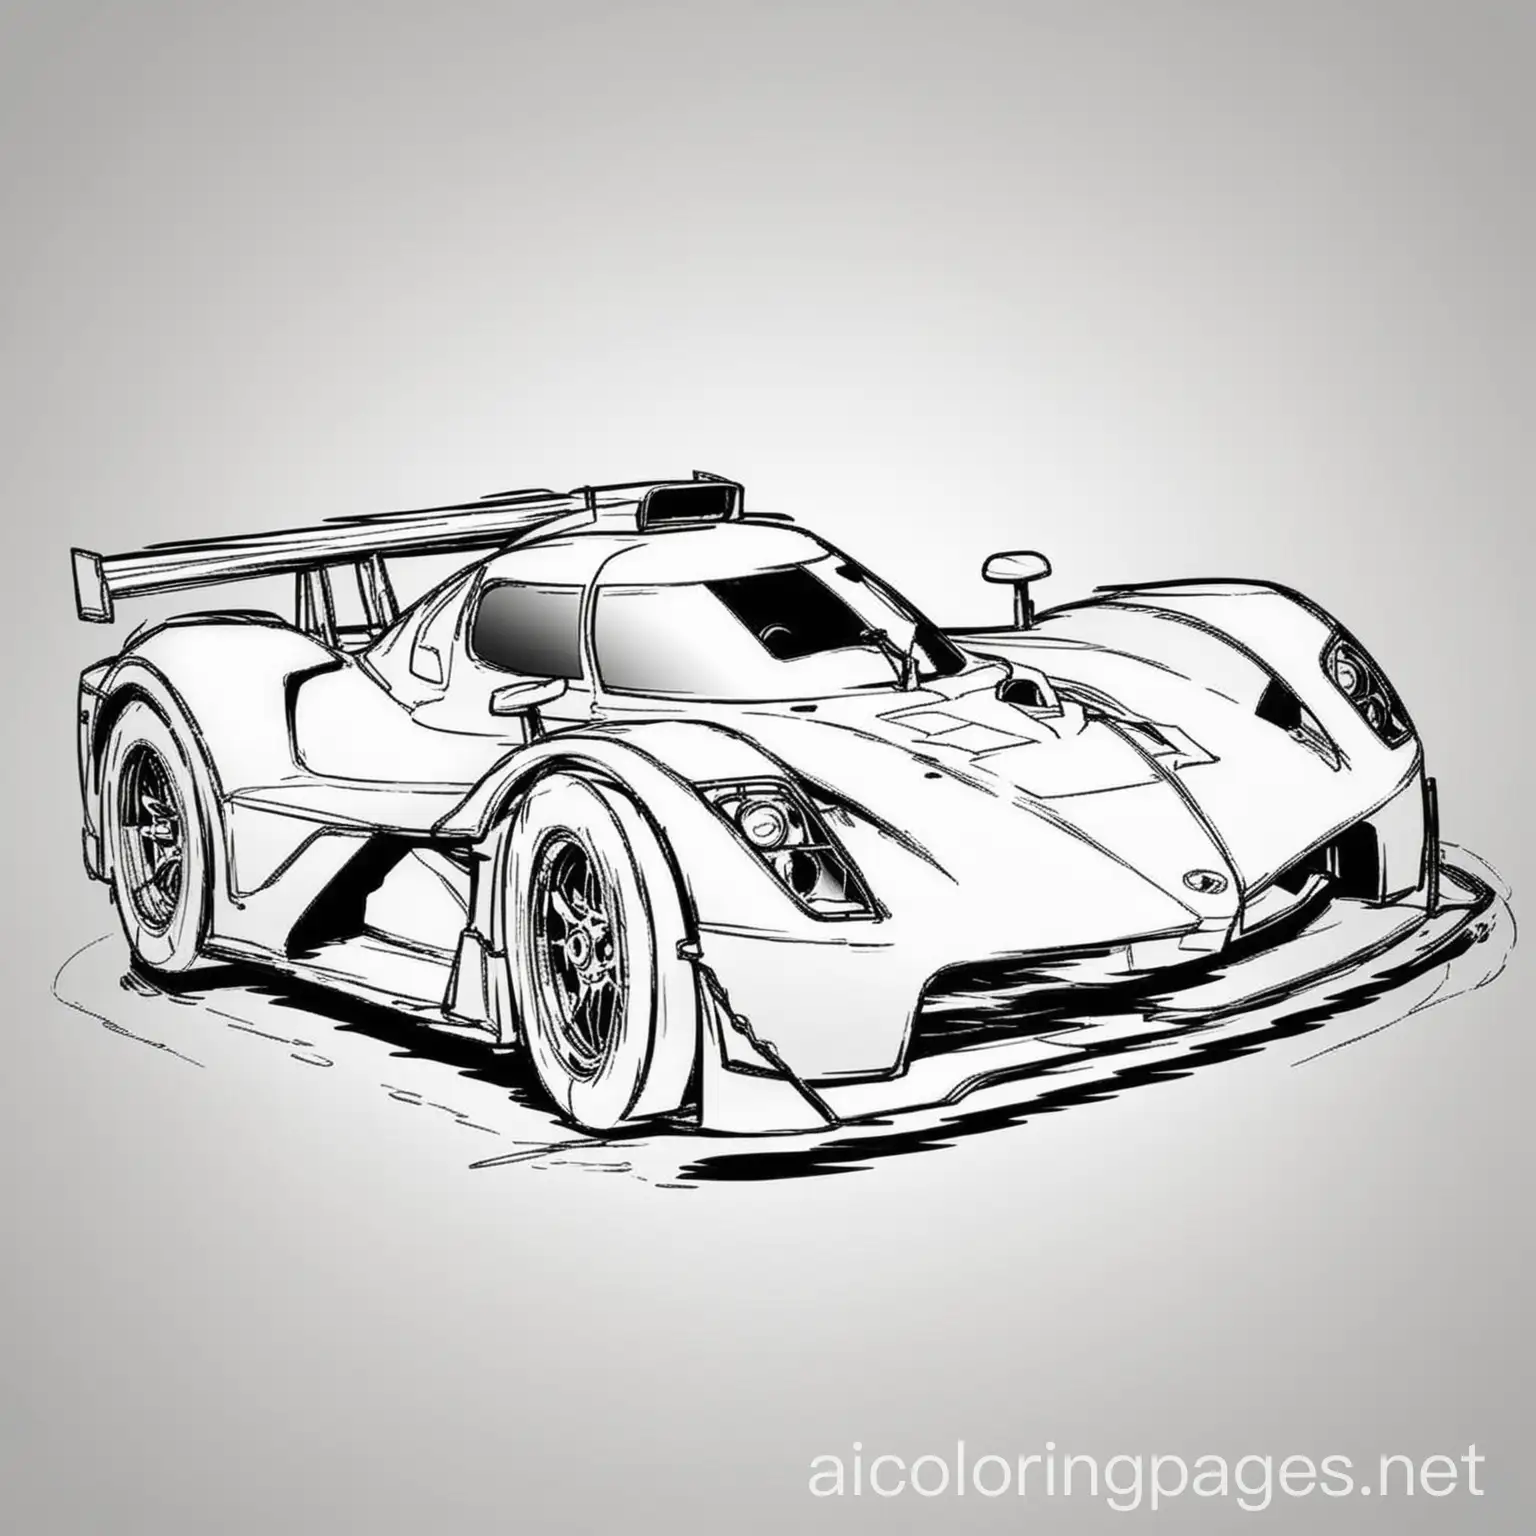 fast racing car coloring page, Coloring Page, black and white, line art, white background, Simplicity, Ample White Space. The background of the coloring page is plain white to make it easy for young children to color within the lines. The outlines of all the subjects are easy to distinguish, making it simple for kids to color without too much difficulty